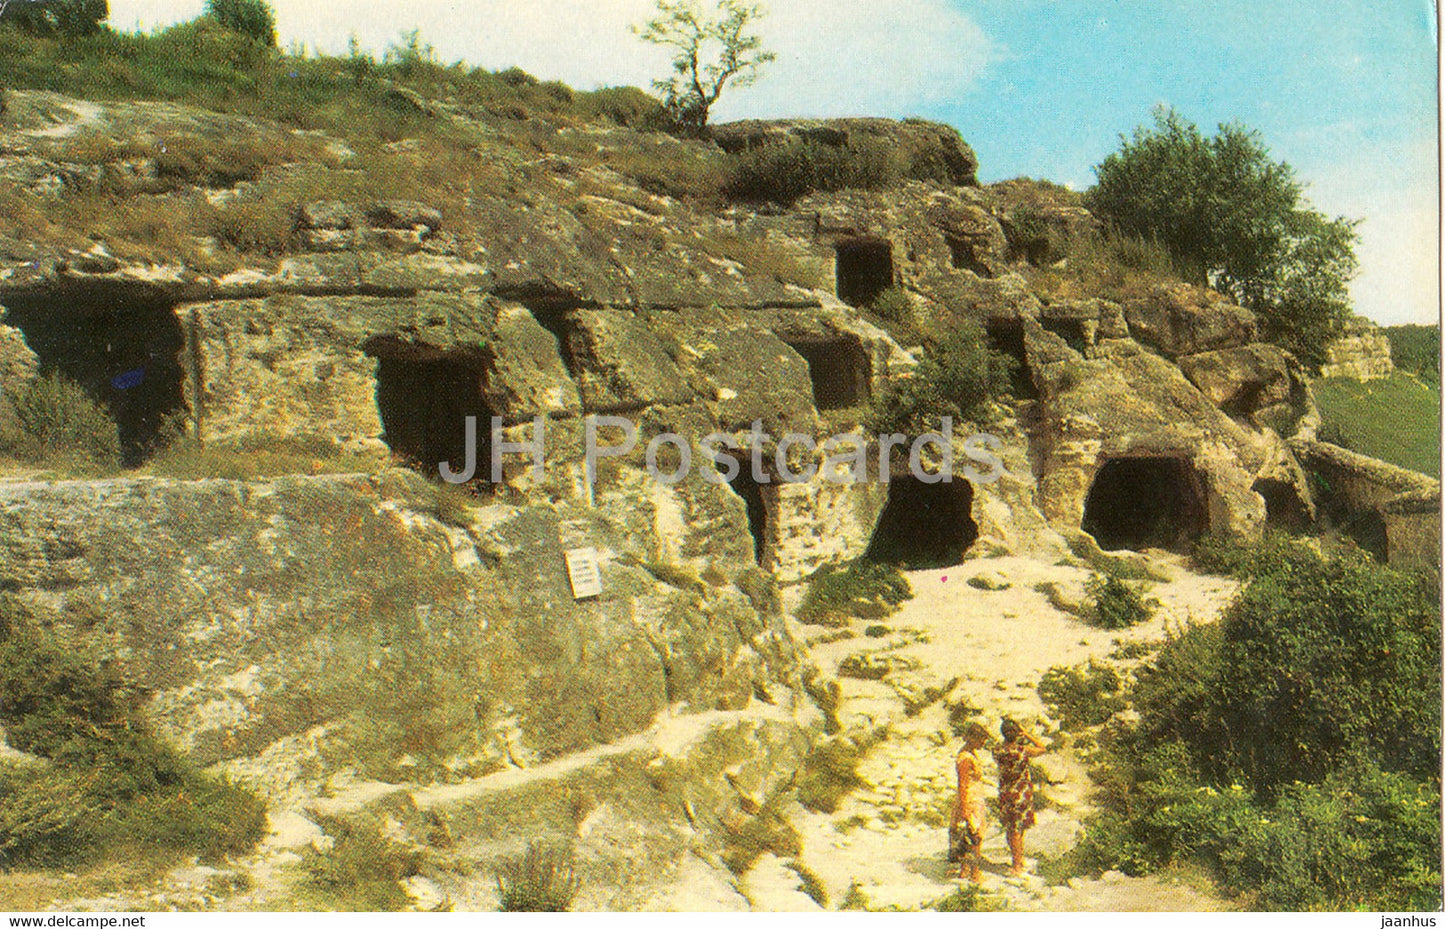 Bakhchisaray Historical Museum - cave town Chufut Kale - entrances to the caves - 1974 - Ukraine USSR - unused - JH Postcards